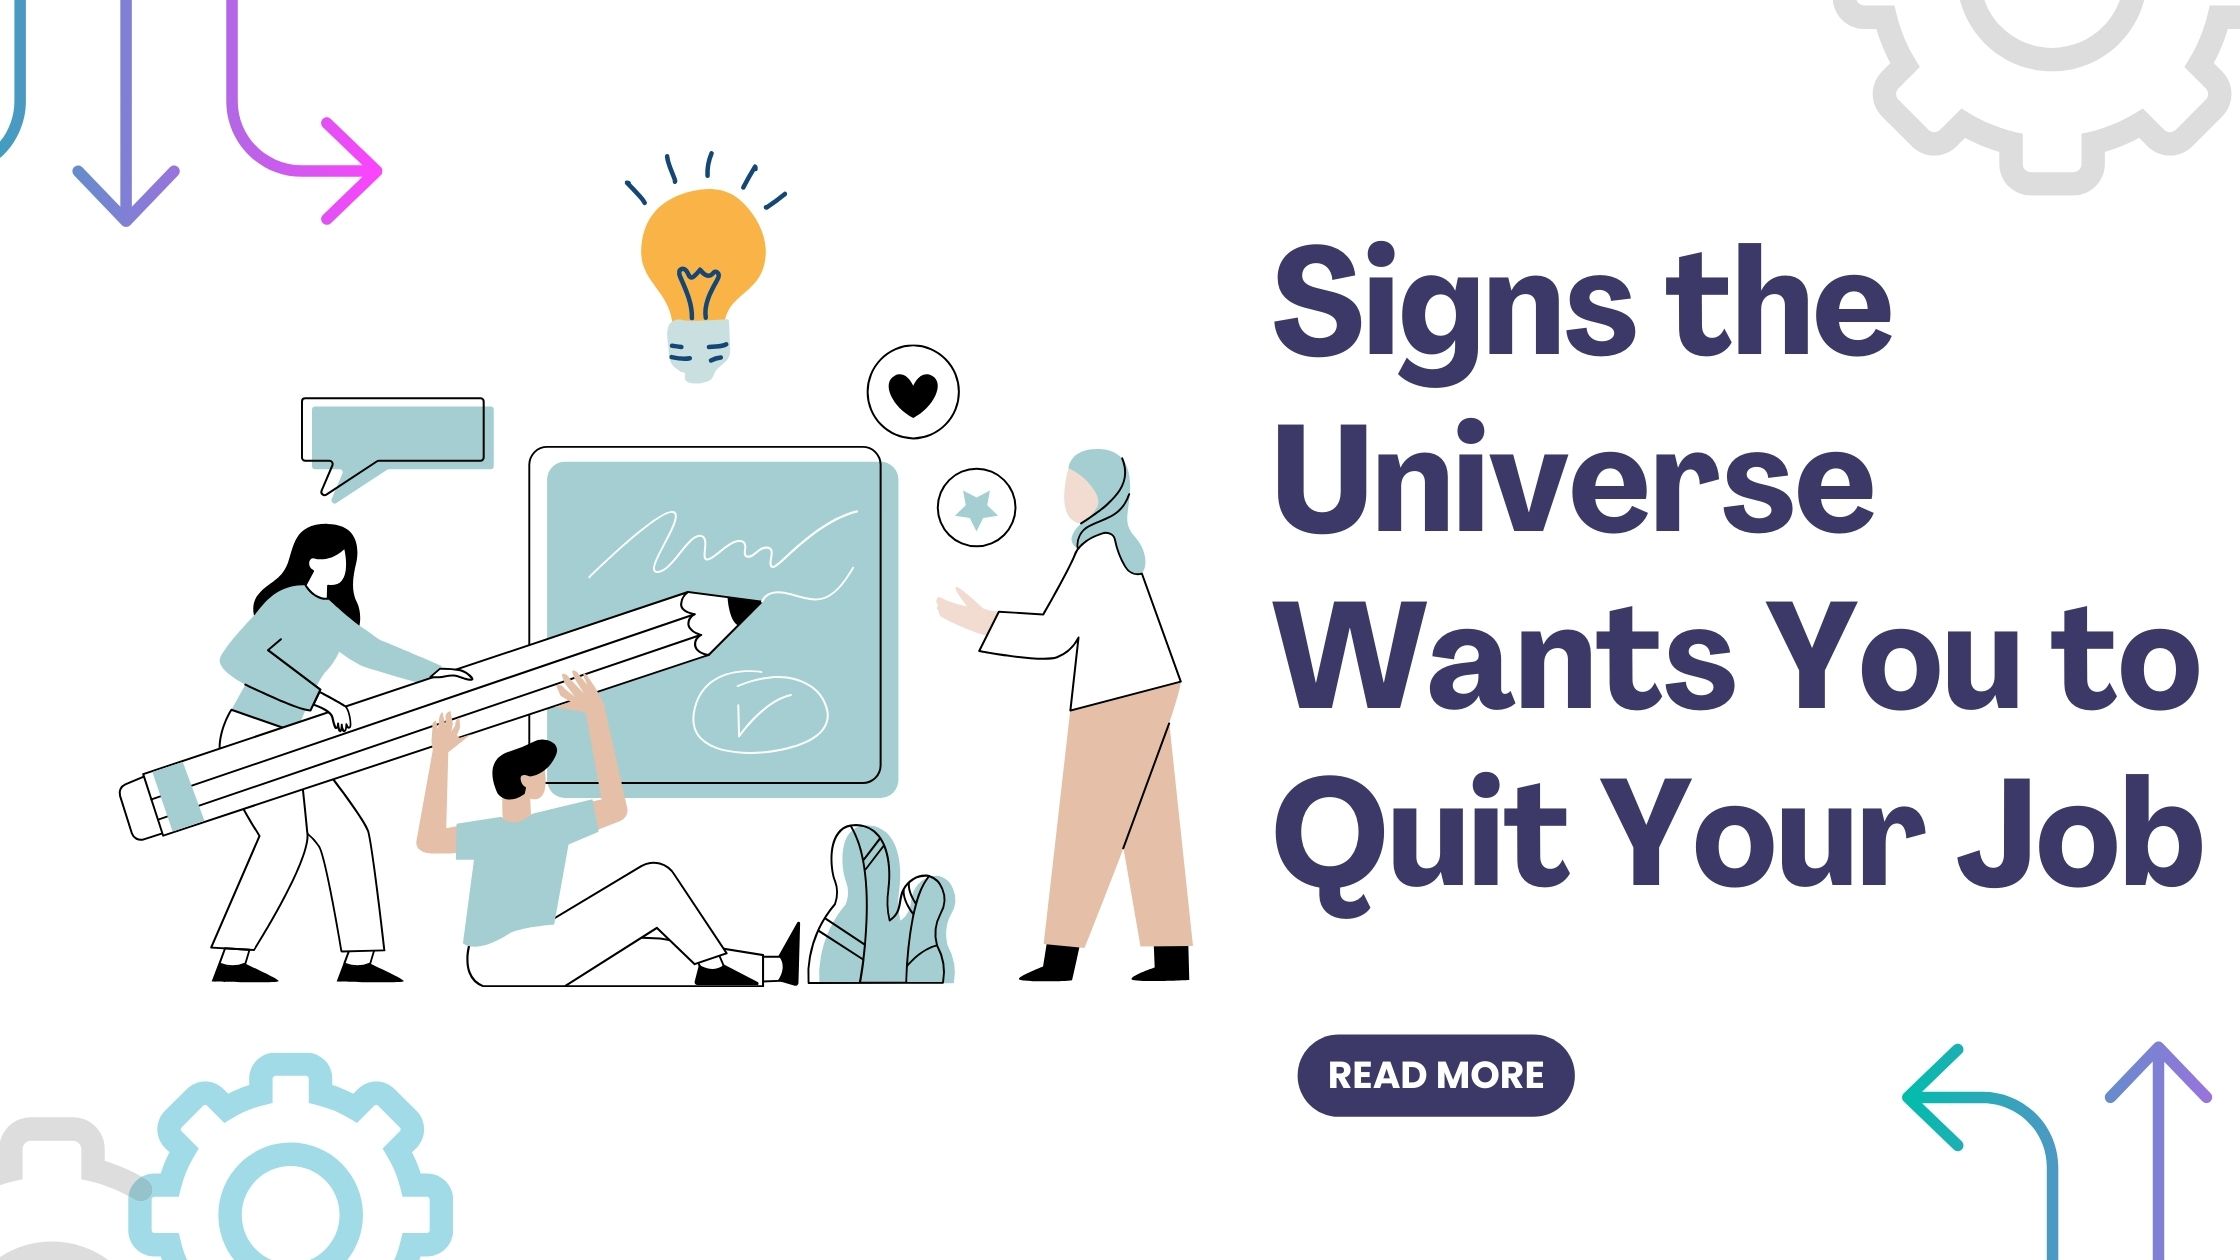 Clear Signs the Universe Wants You to Leave Your Job